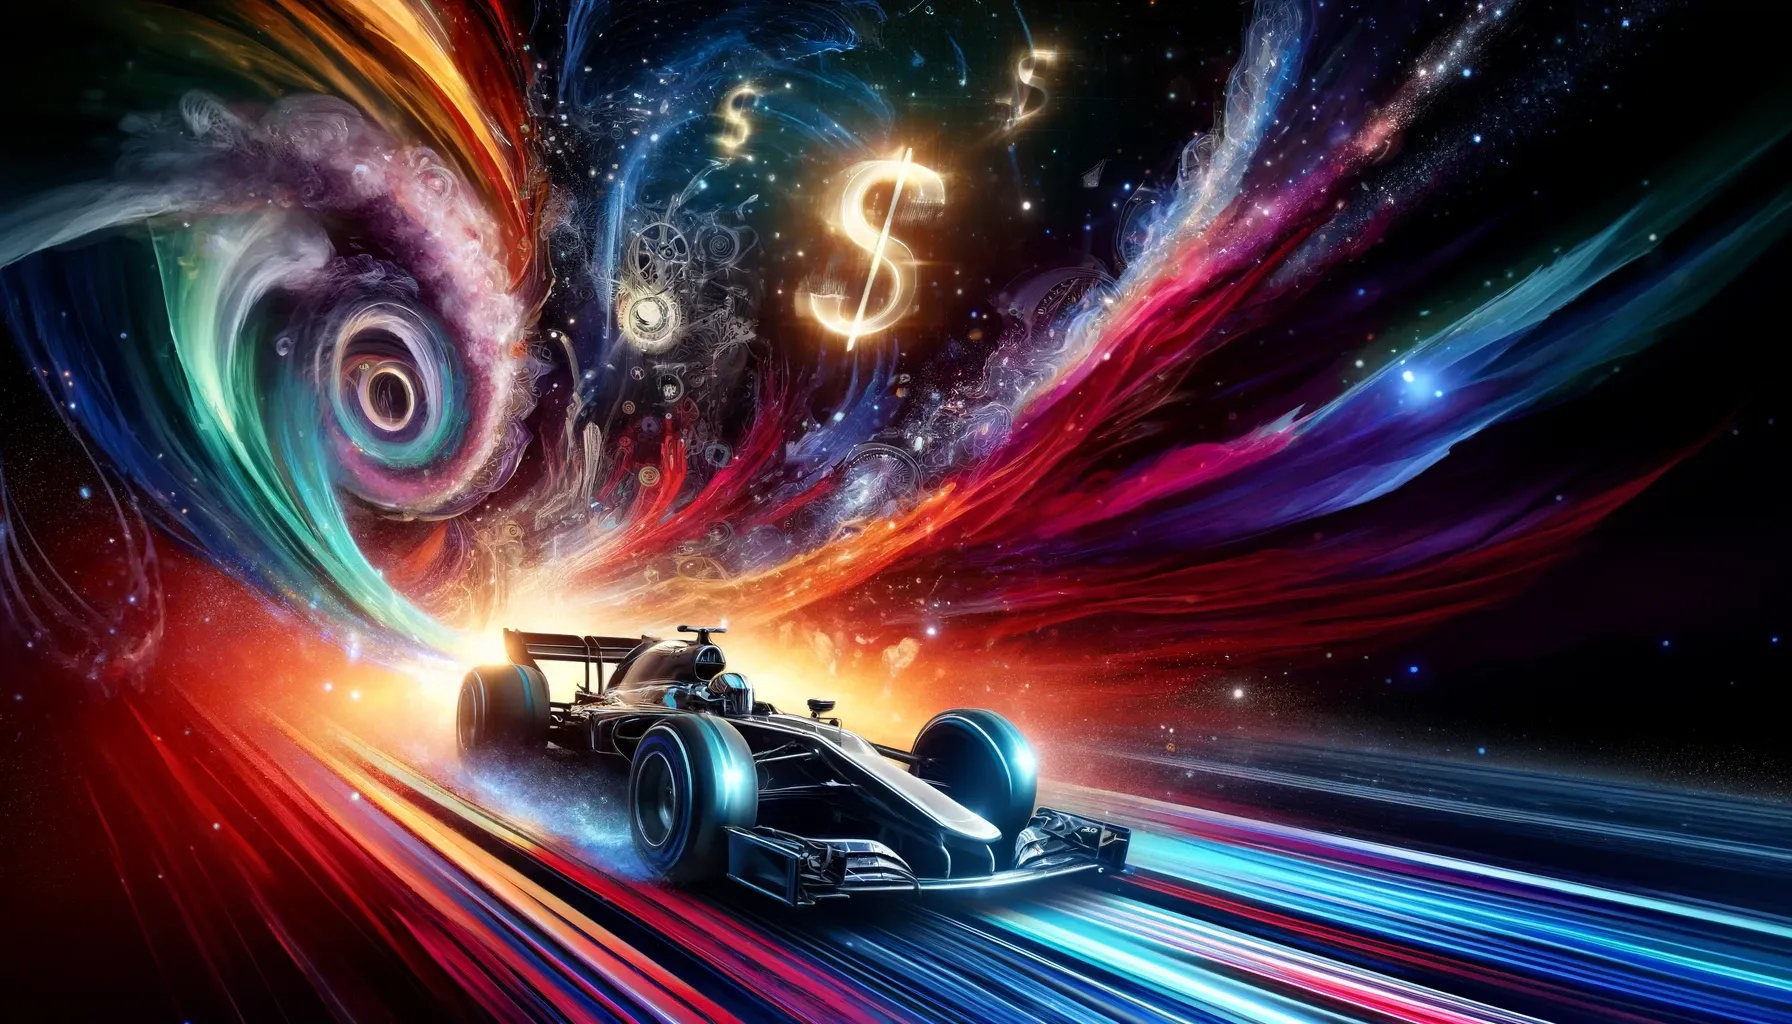 Race car tear through space with cosmic swirls and currency